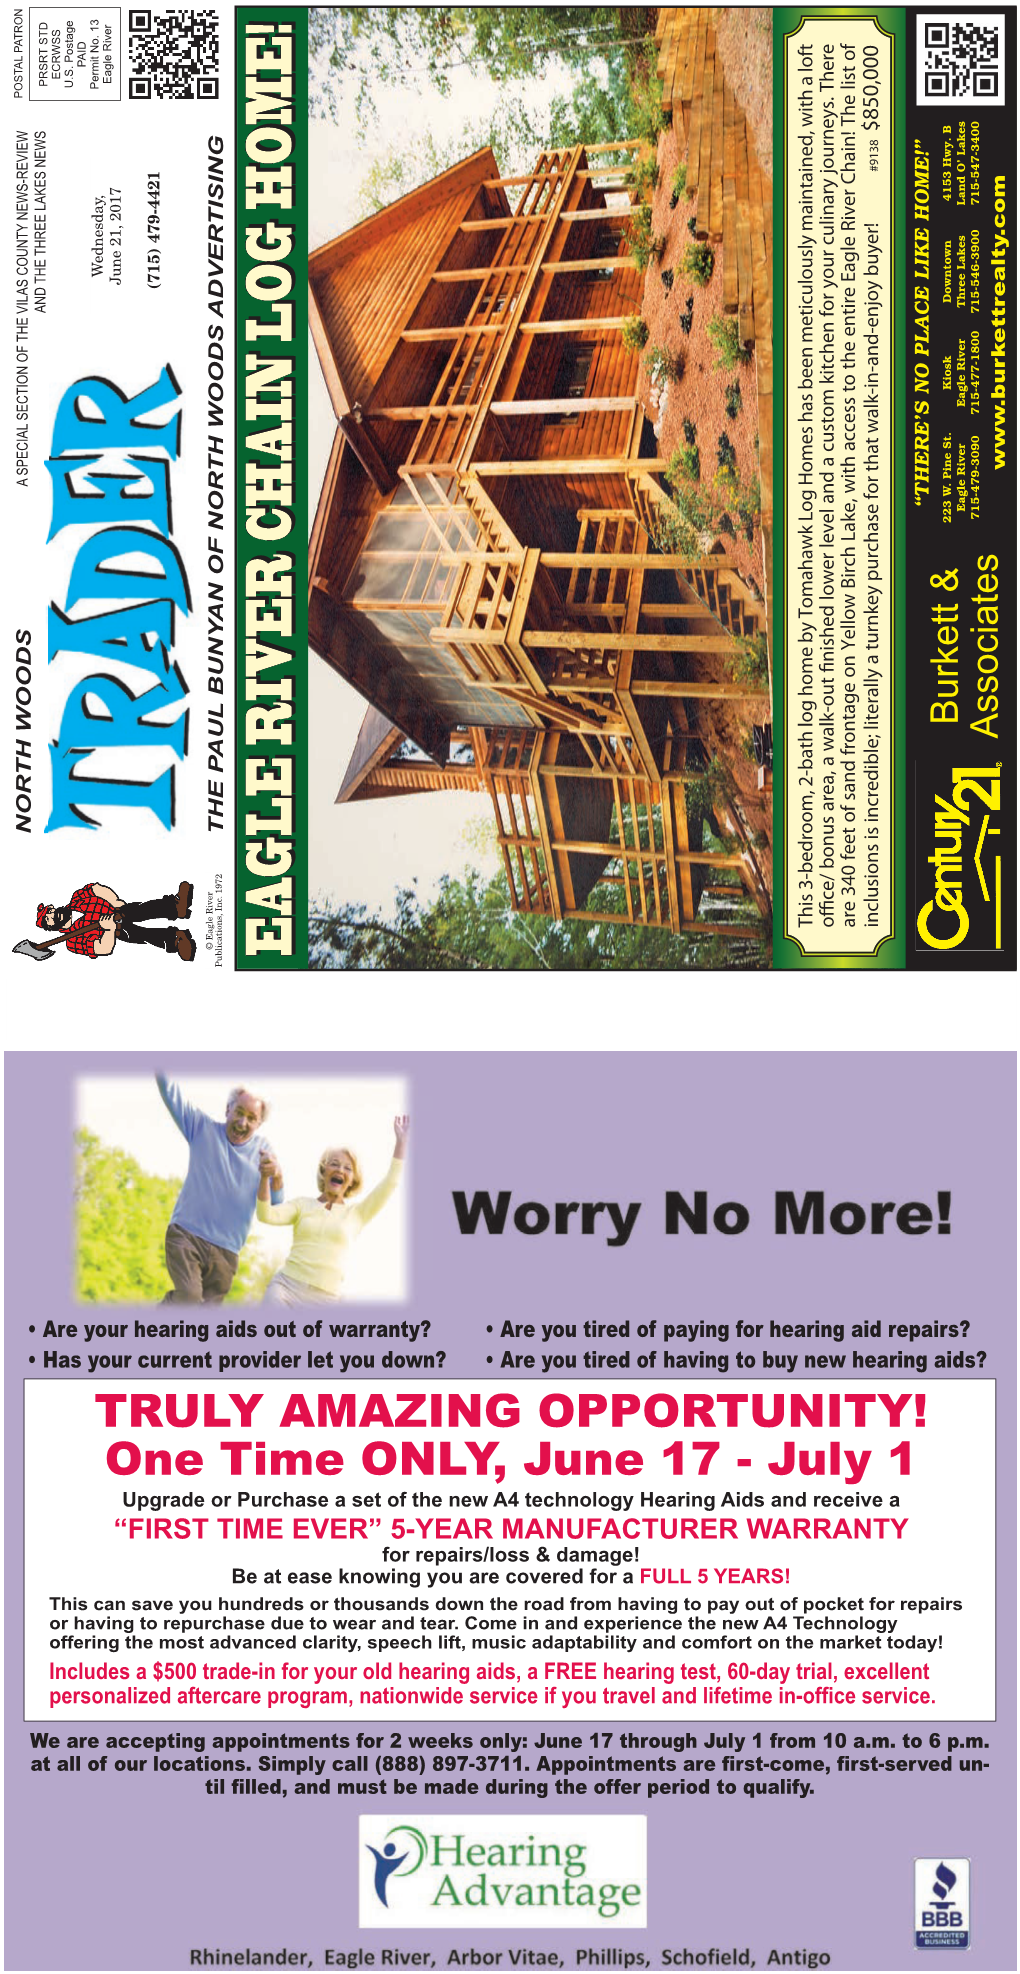 EAGLE RIVER CHAIN LOG HOME! for Repairs/Loss&Damage!